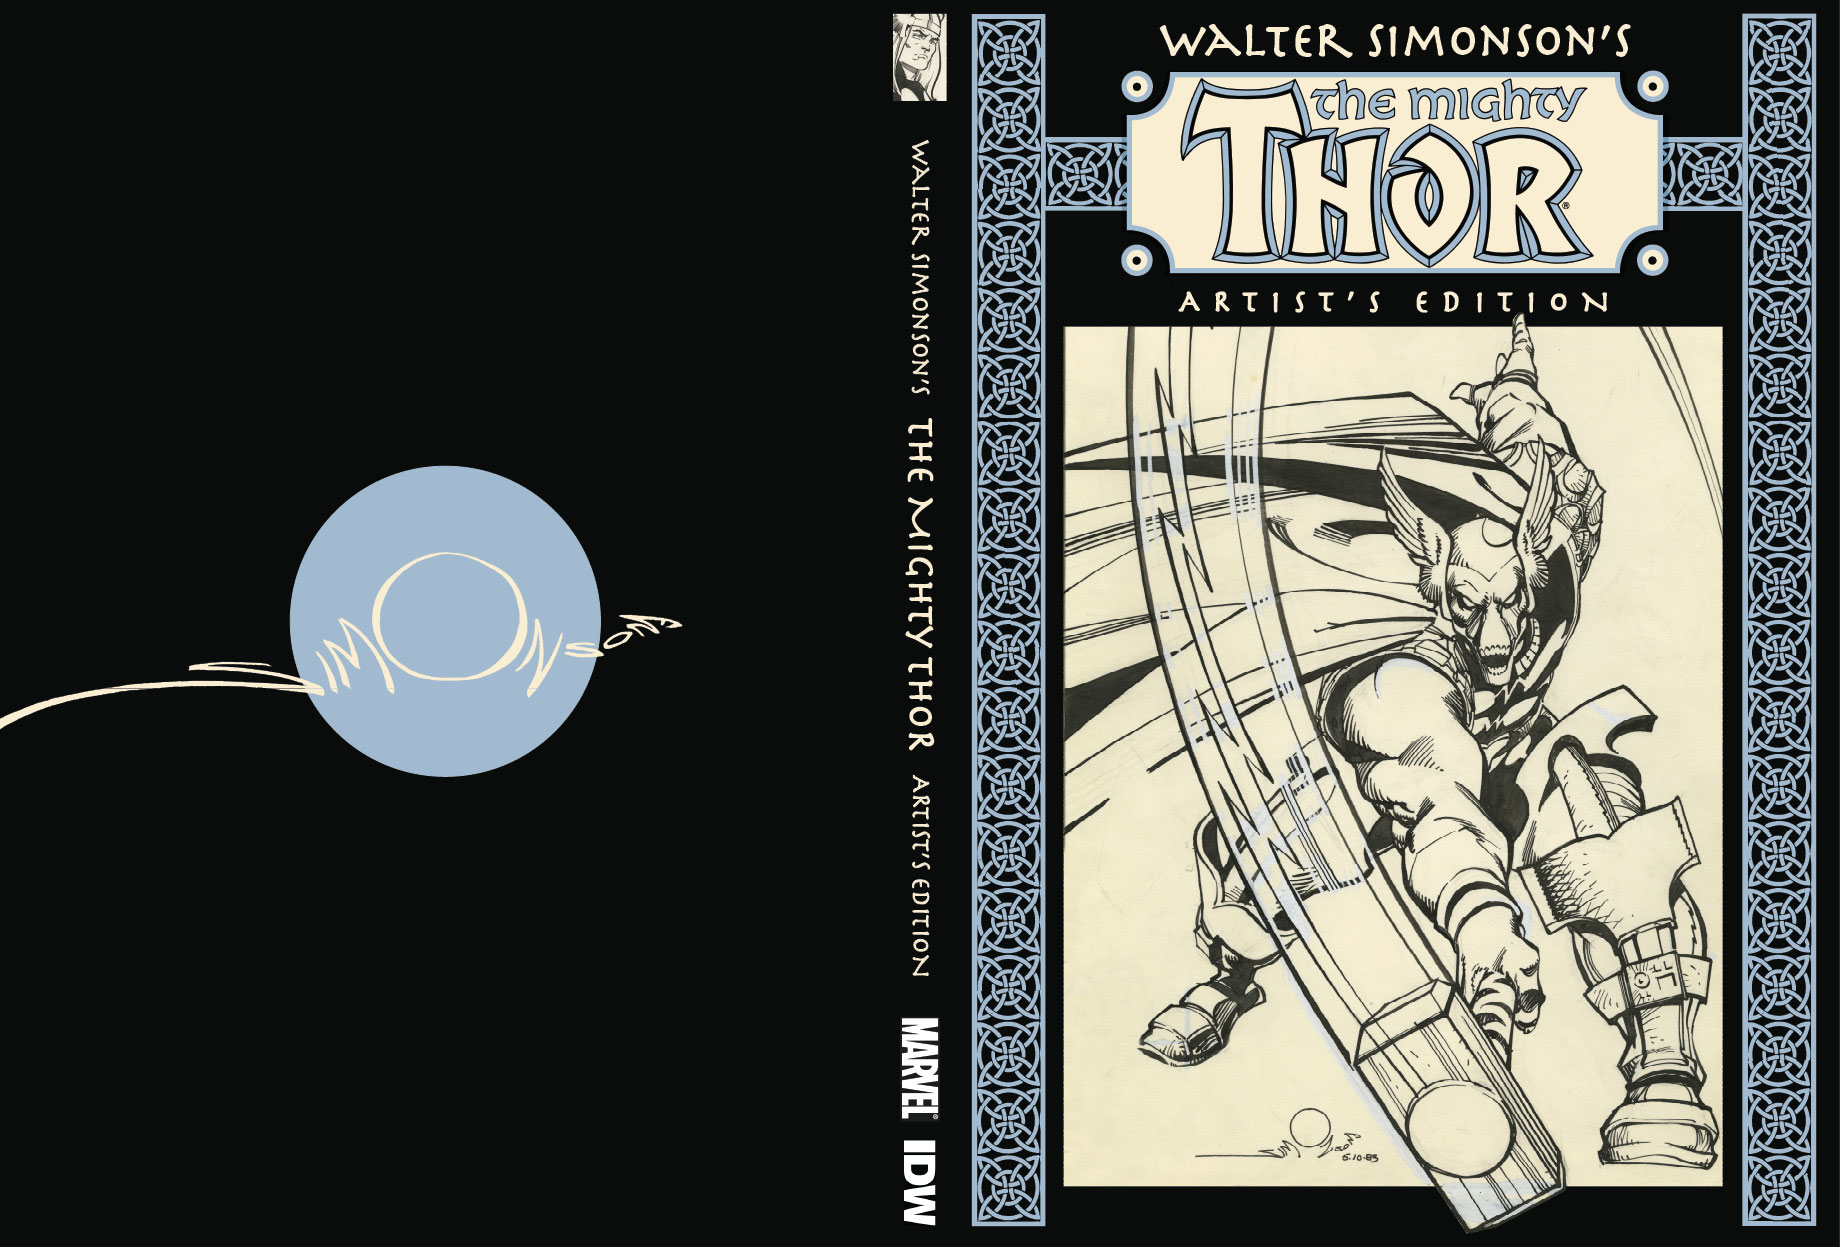 Walter Simonsons The Mighty Thor Artists Edition cover spread